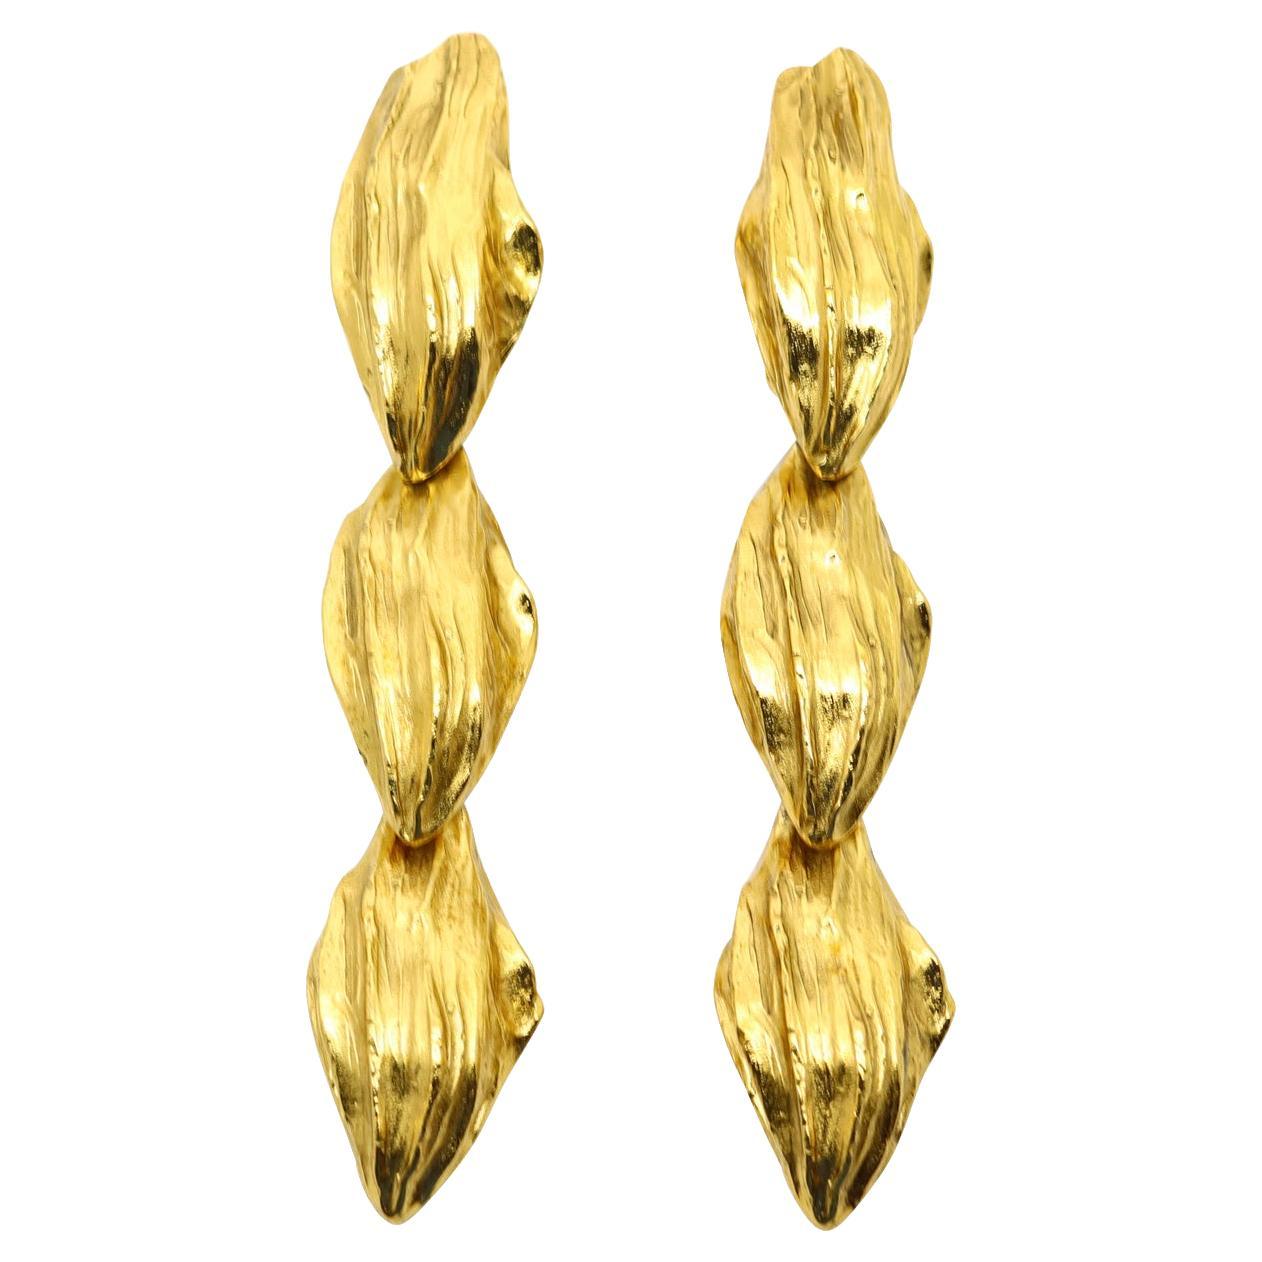 Vintage Maison Goossens Yves Saint Laurent YSL Gold Tone Dangling Textured Earrings. Clip on. One of those that becomes magical when you see it on You. These are the type of earrings or clothing that don't always have hanger or curb appeal until you